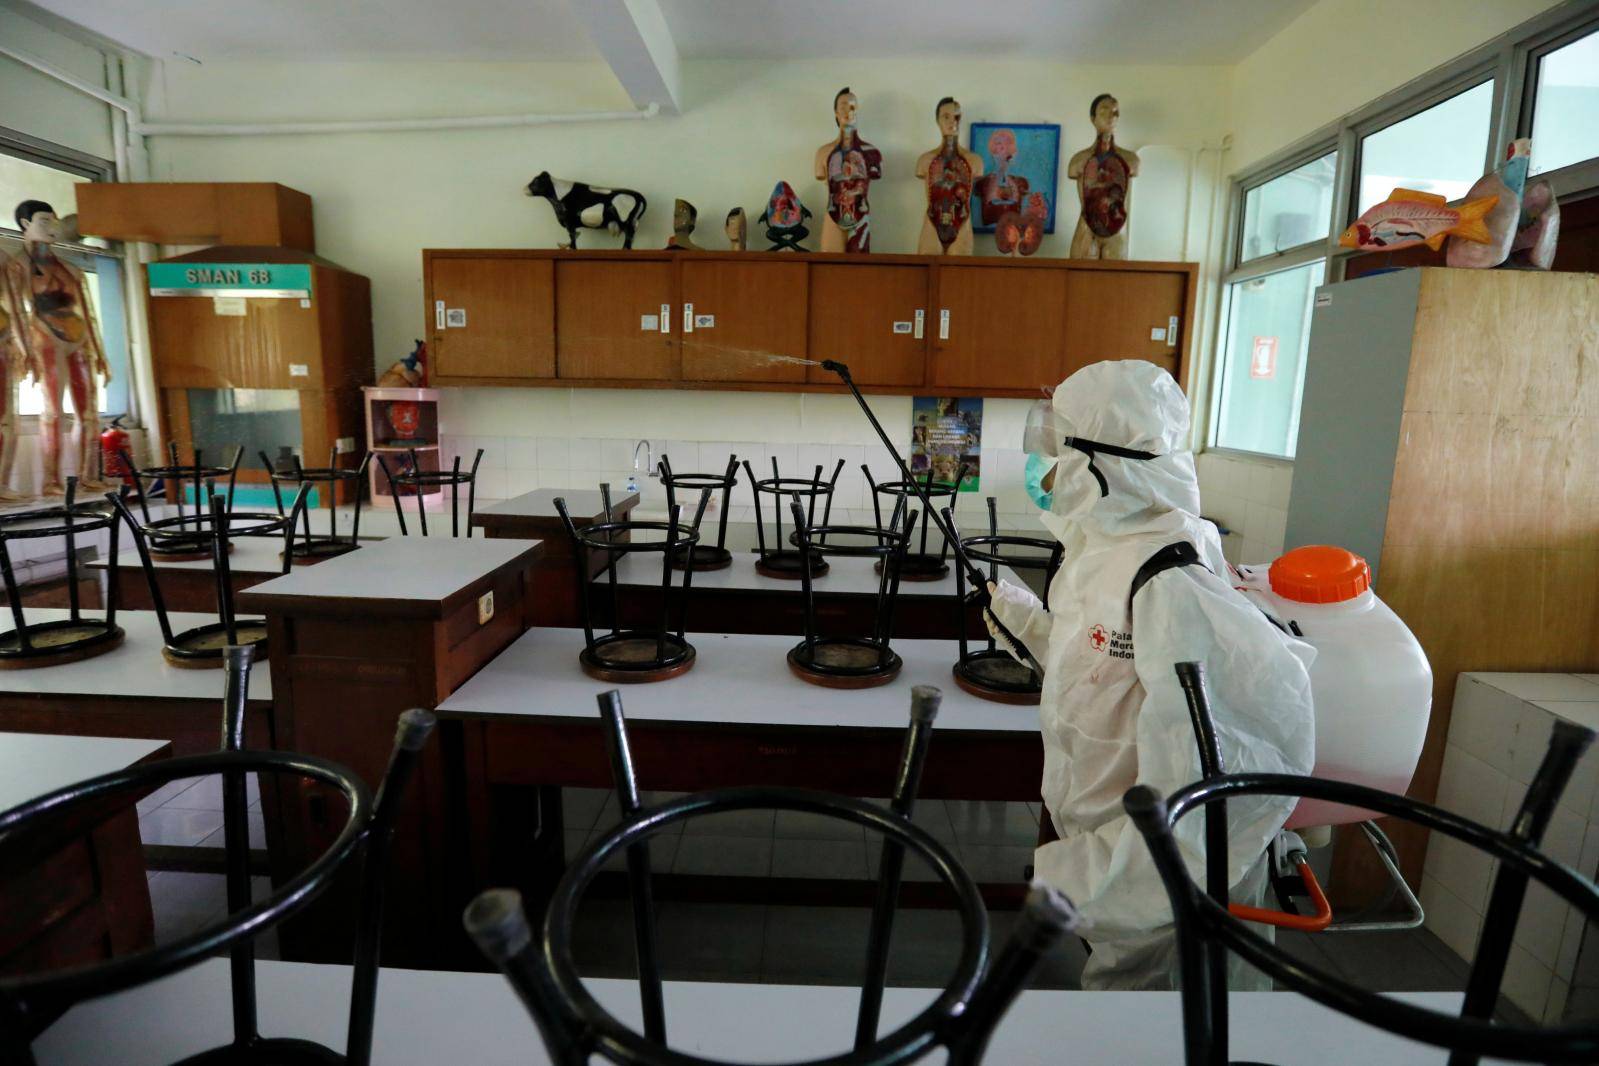 A volunteer from Indonesia's Red Cross sprays disinfectant inside the laboratorium of a school closed amid the spread of coronavirus in Jakarta